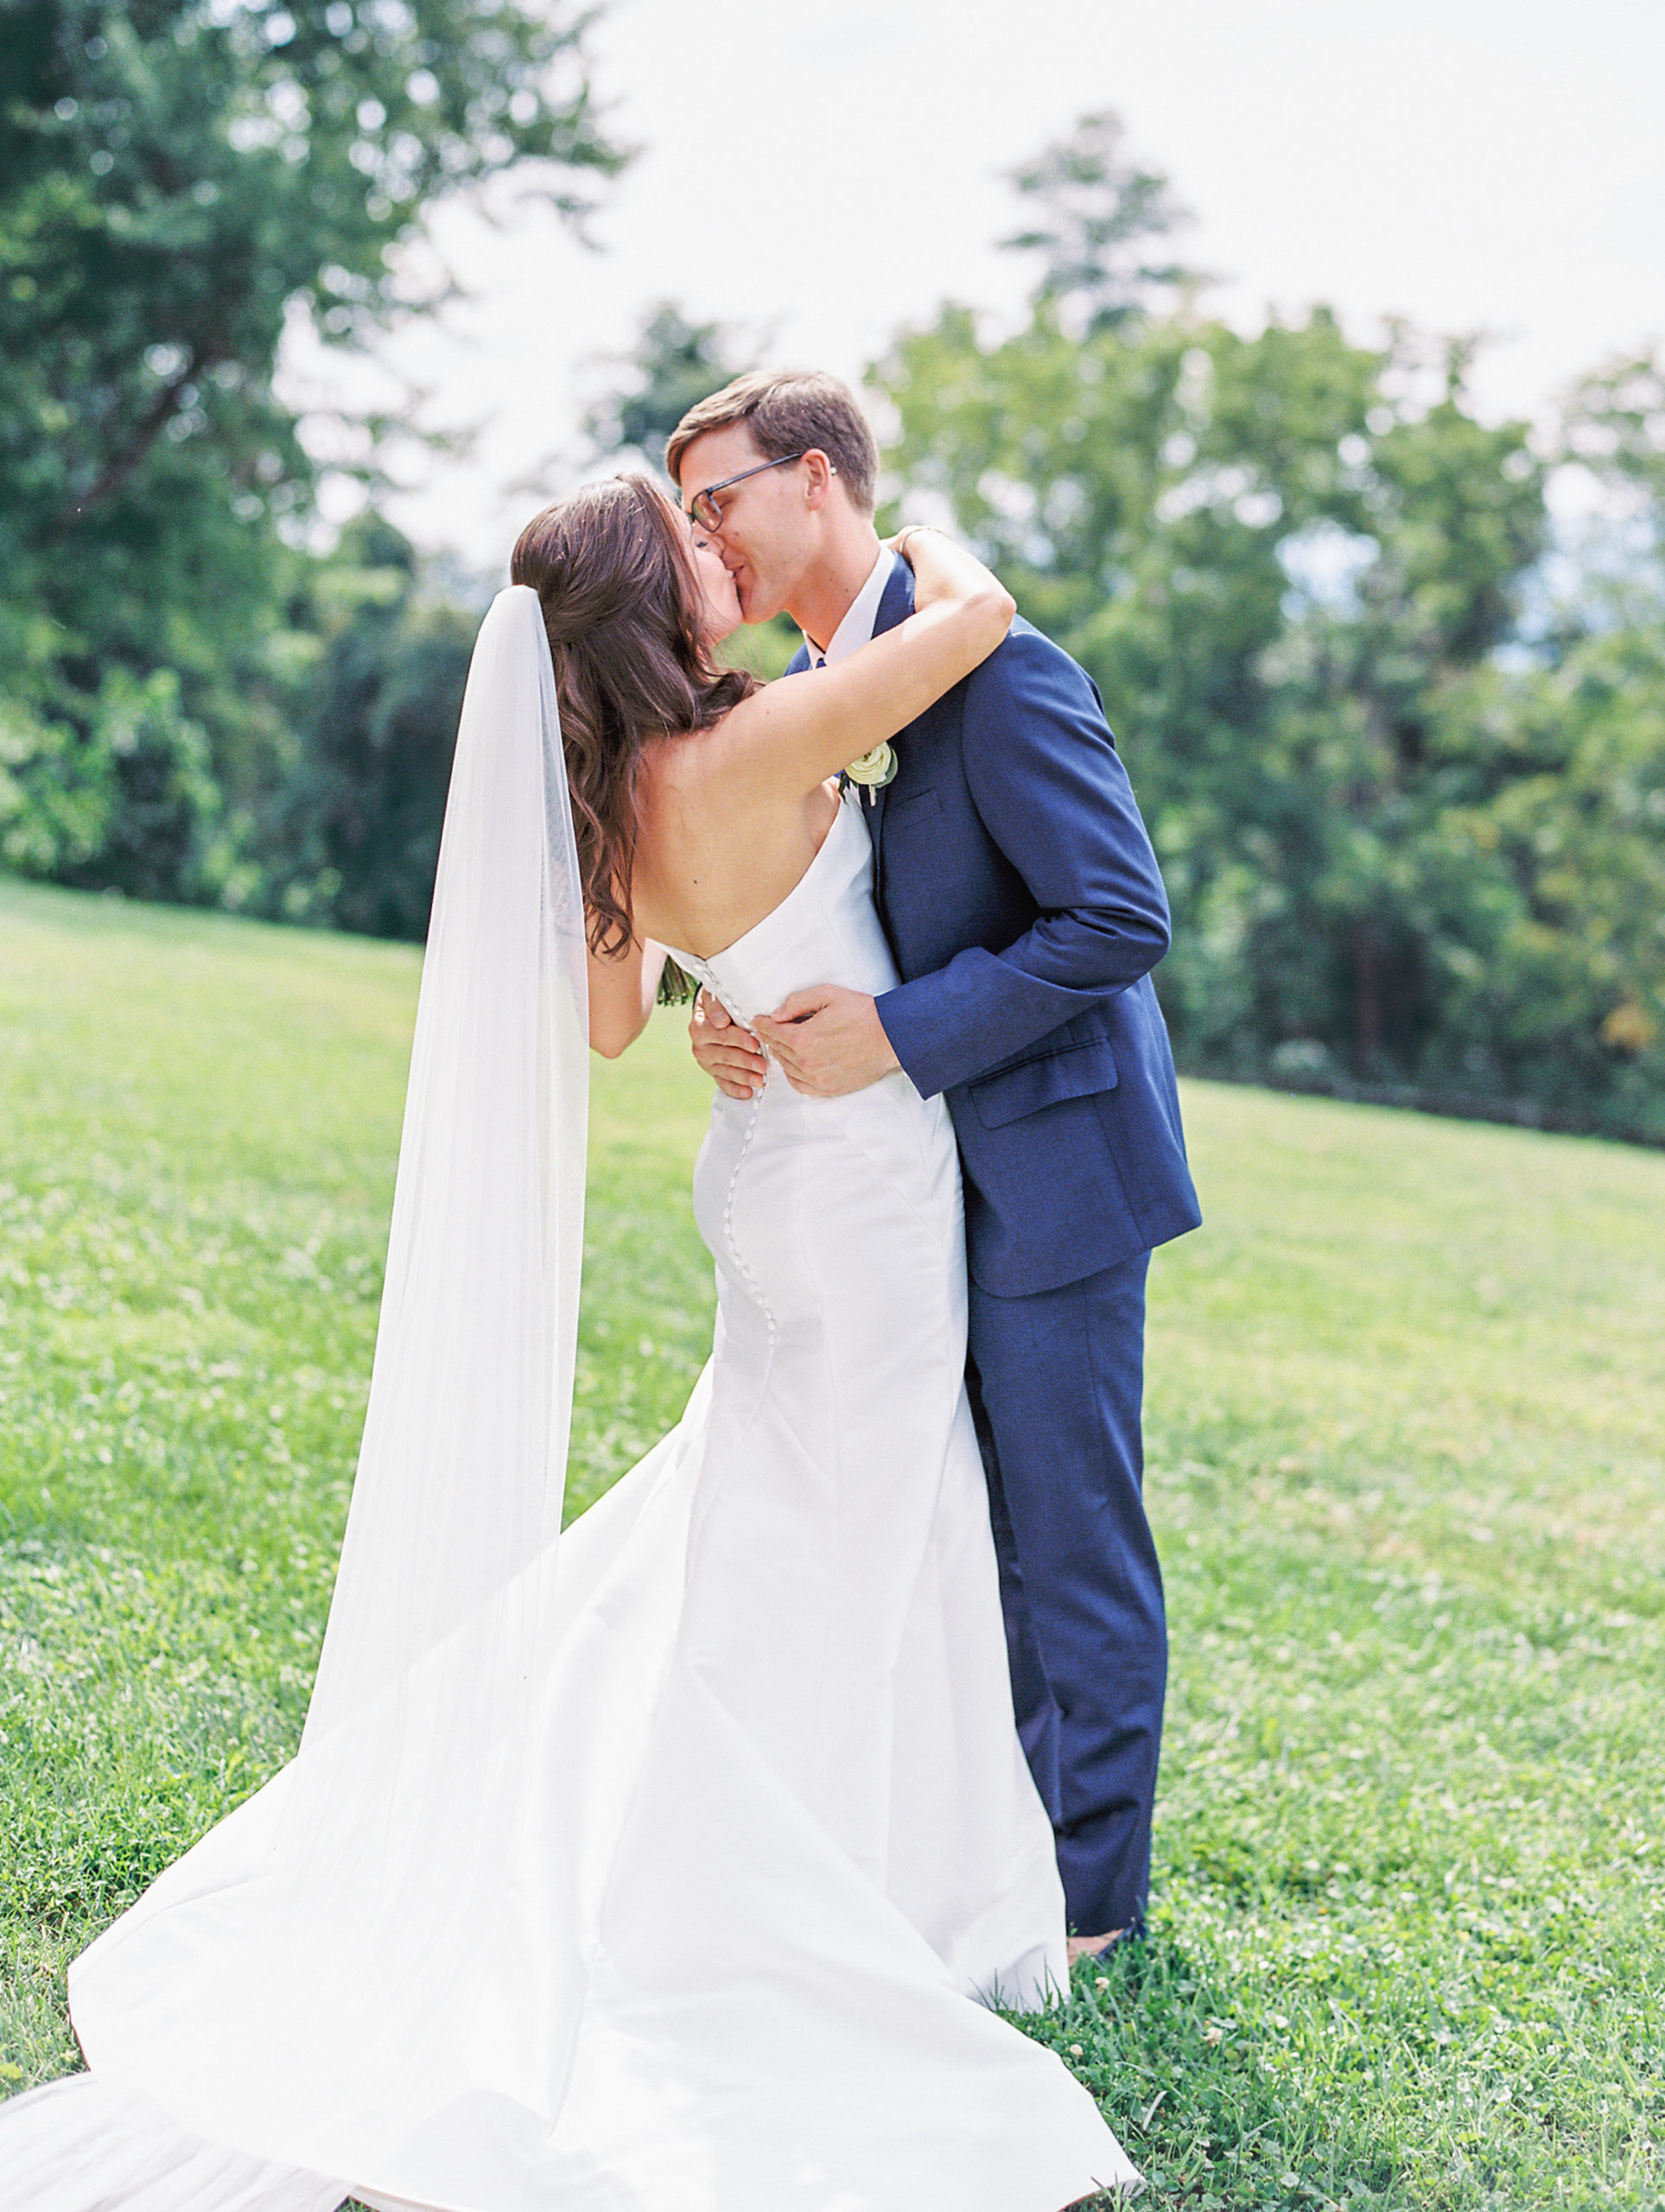 Bride and groom share a kiss outside on mountaintop landscape 